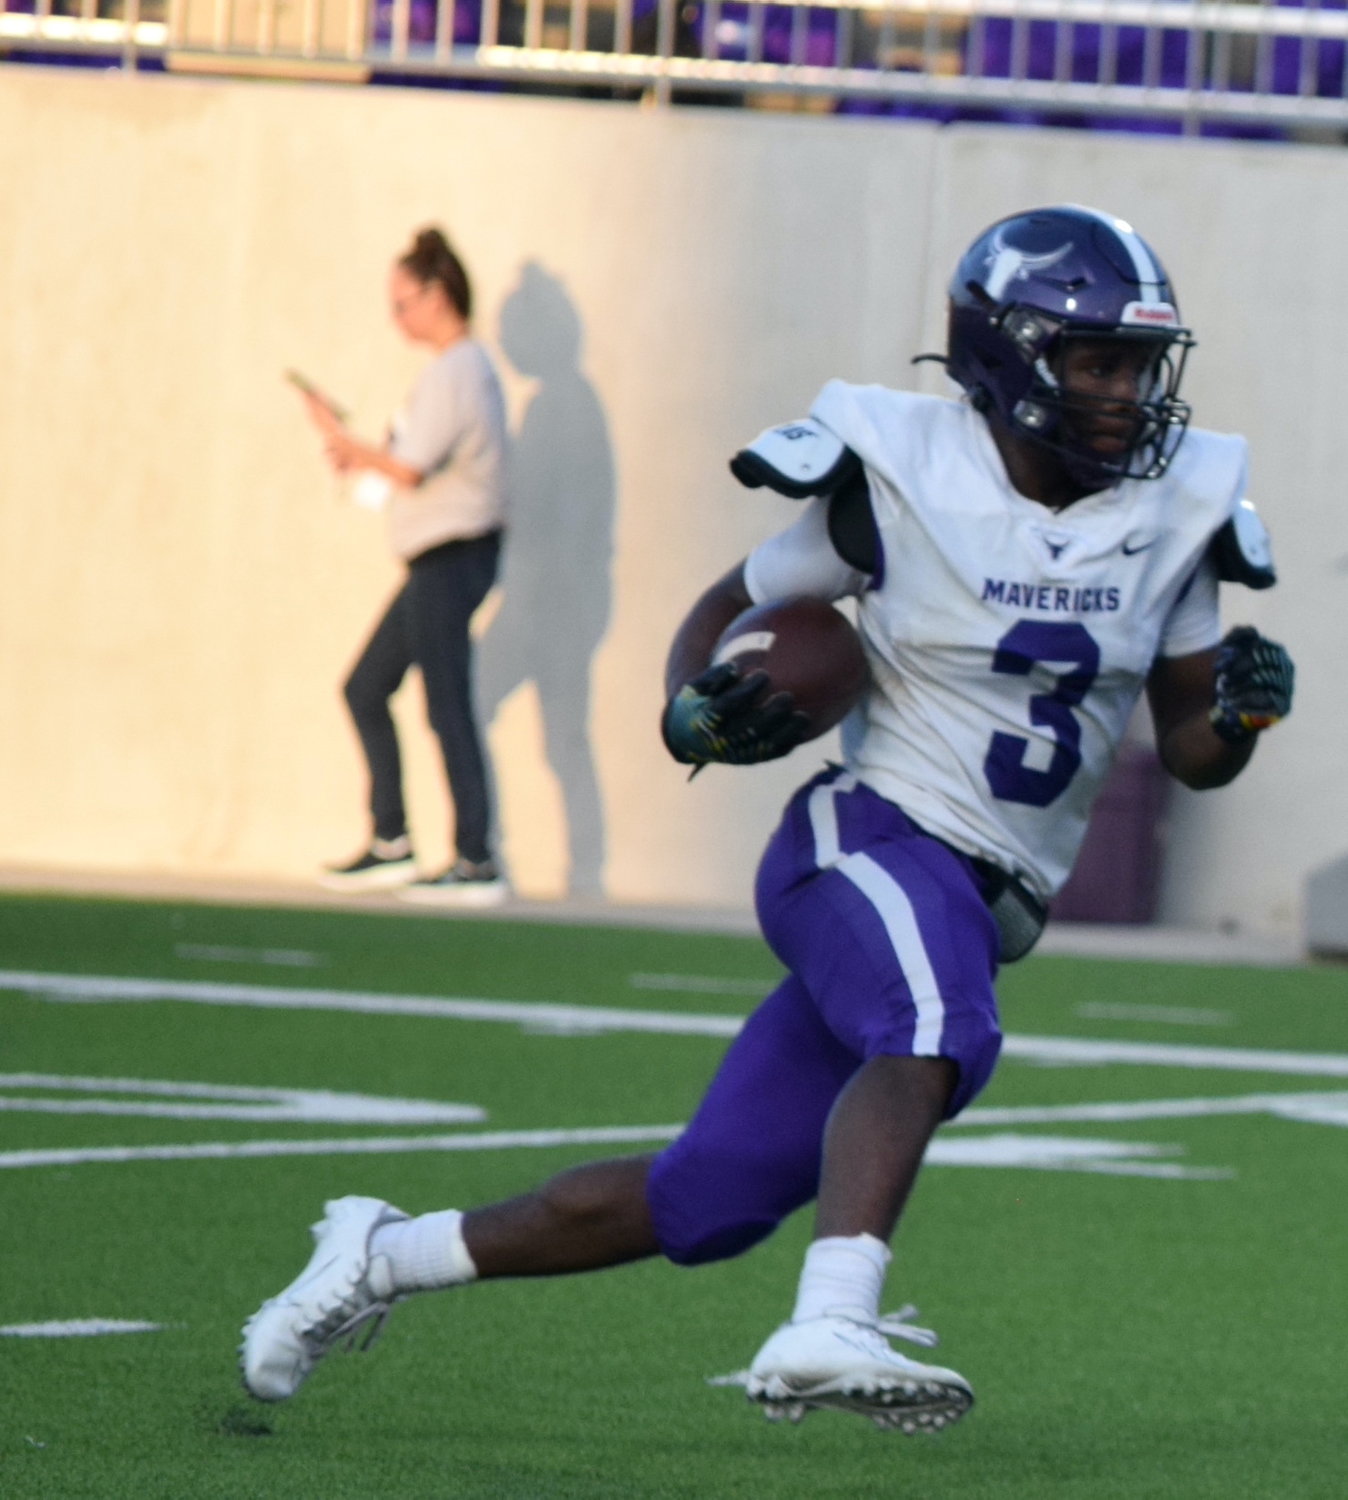 Morton Ranch's Santana Scott runs the ball during a game against Paetow on Sept. 3 at Legacy Stadium.